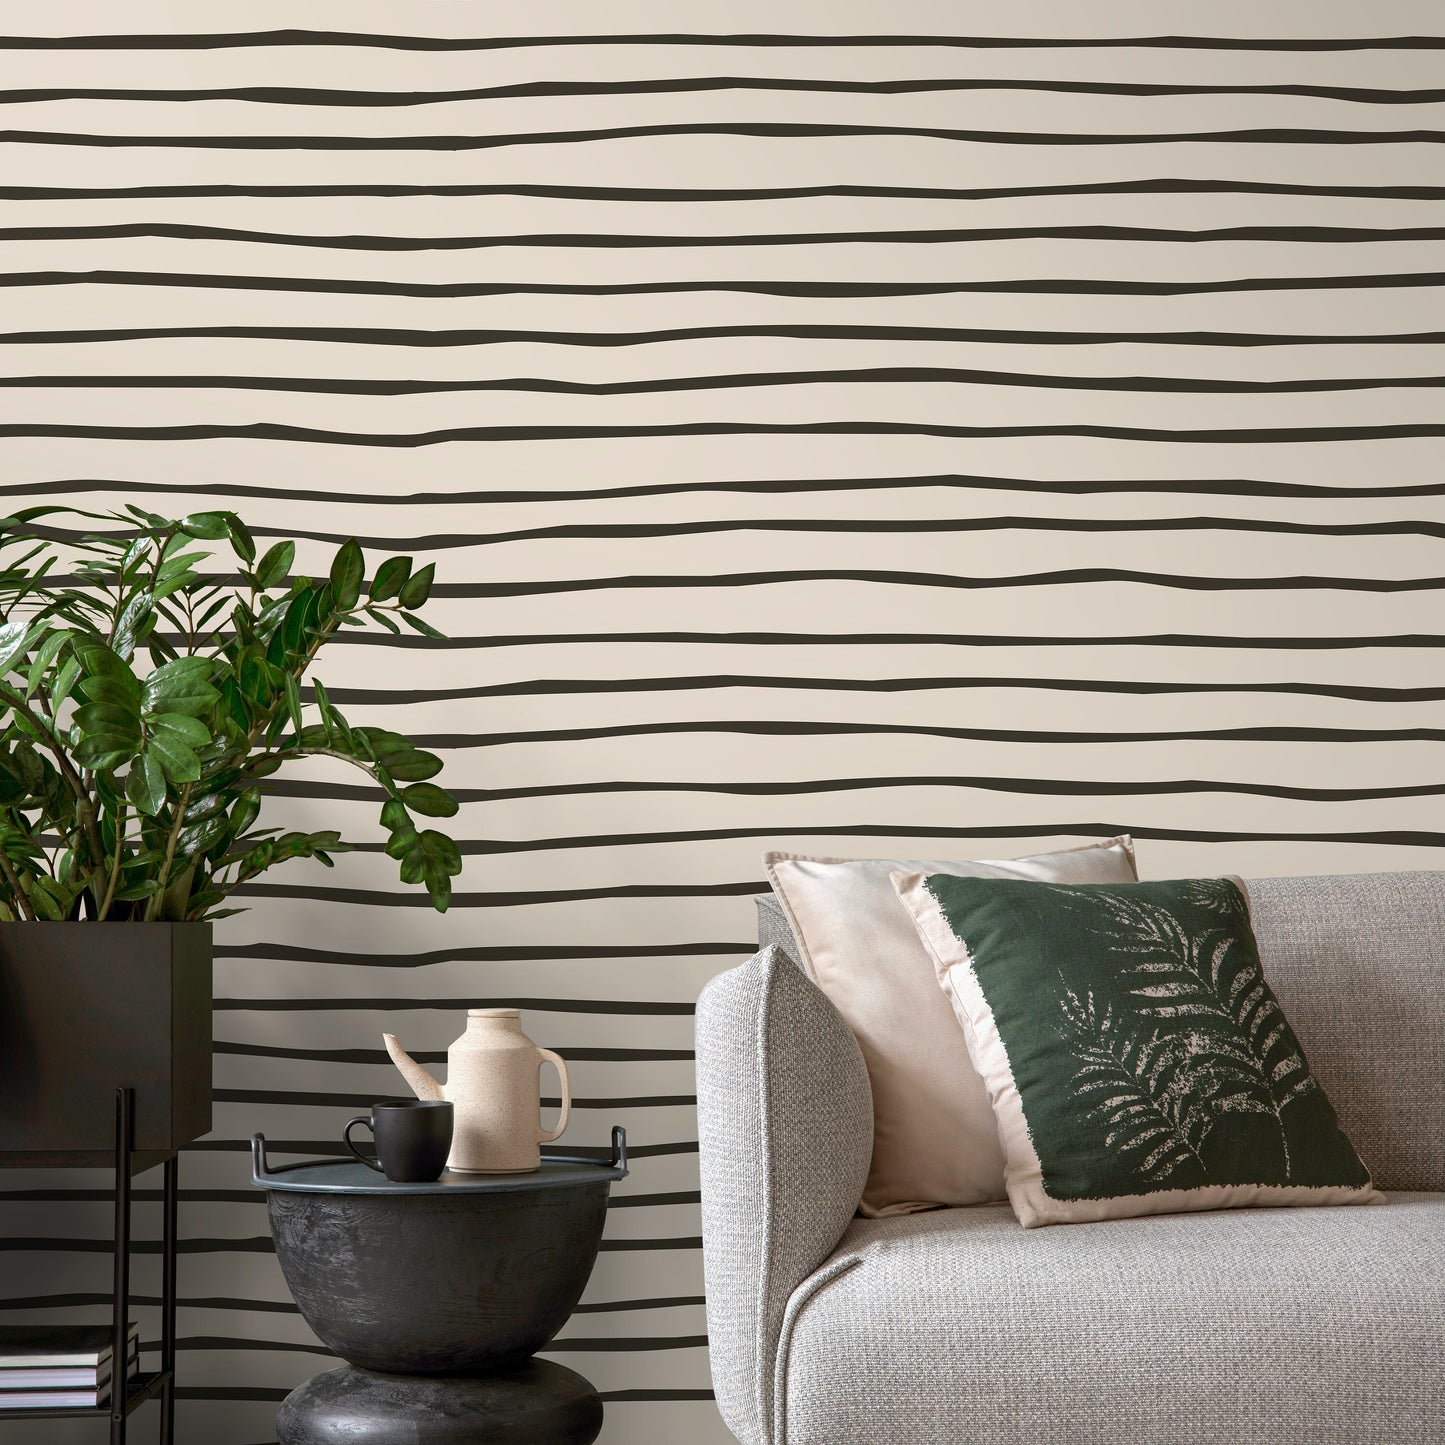 Black and Beige Striped Wallpaper Modern Waves Wallpaper Peel and Stick and Traditional Wallpaper - D777